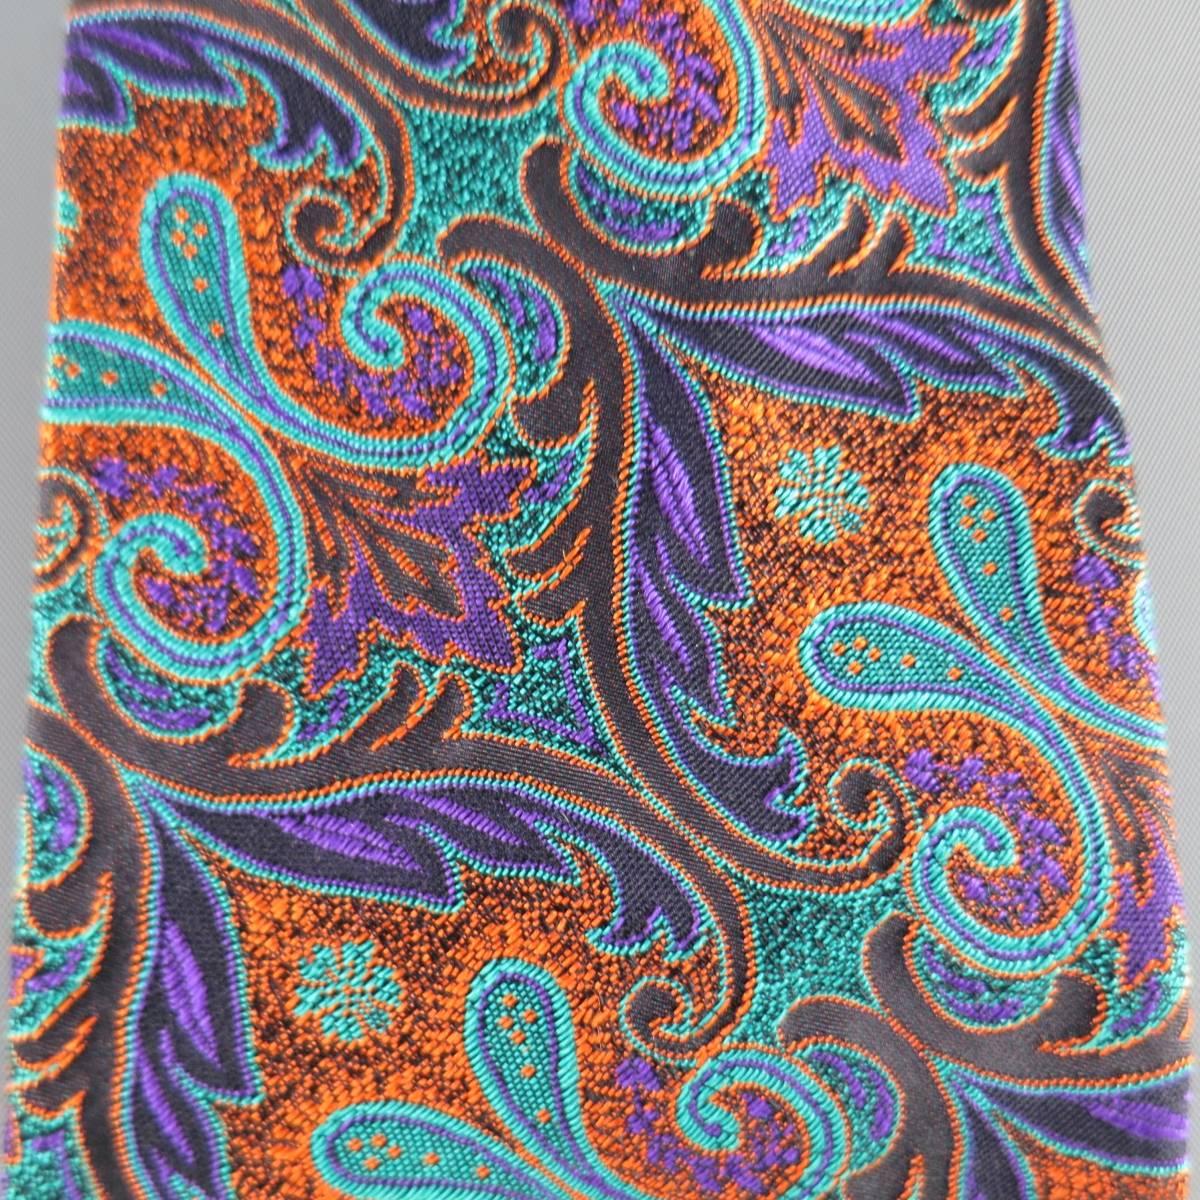 GIANNI VERSACE Vintage Tie consists of 100% silk material in a teal and orange color tone. Designed in a modern style, paisley brocade pattern with multi-color accents. Comes with original boxing. Made in Italy .
 
Good Pre-Owned